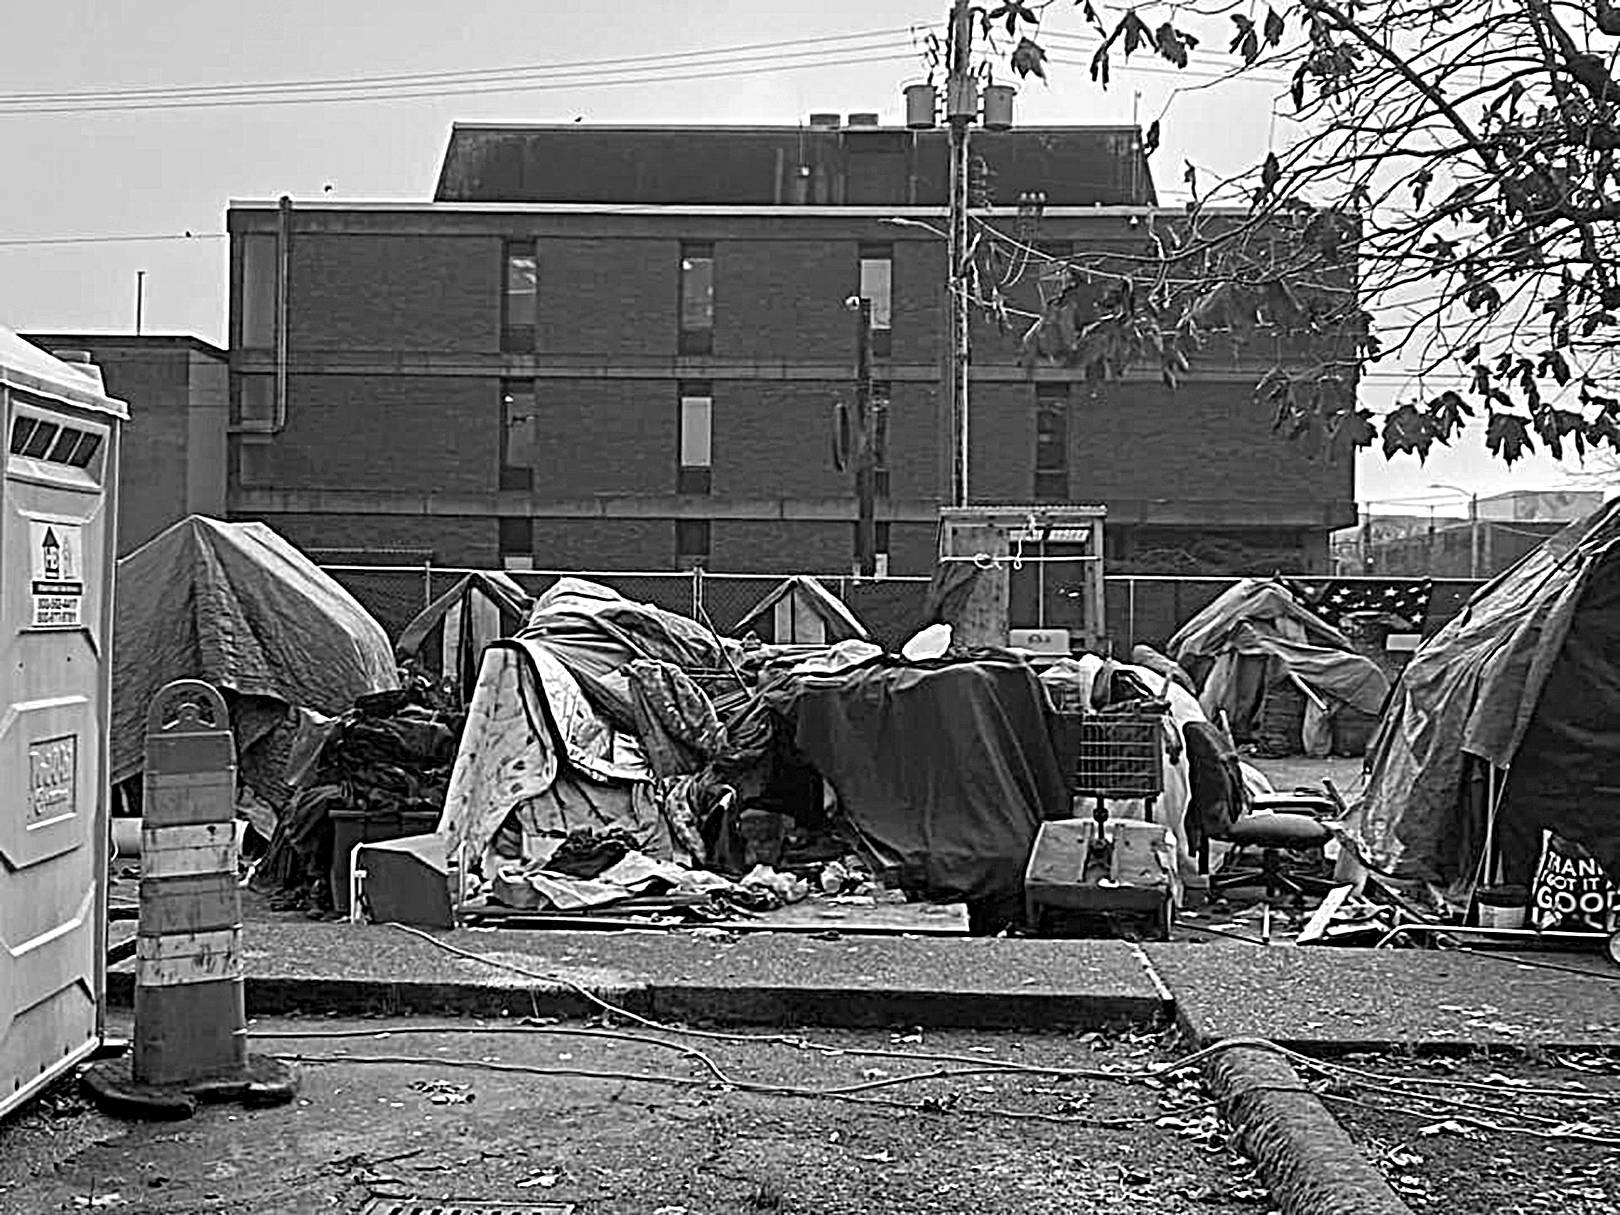 A look inside the fencing around the homeless camp adjacent to Aberdeen City Hall, visible in the background. (Photo Courtesy Kellie Daniels)